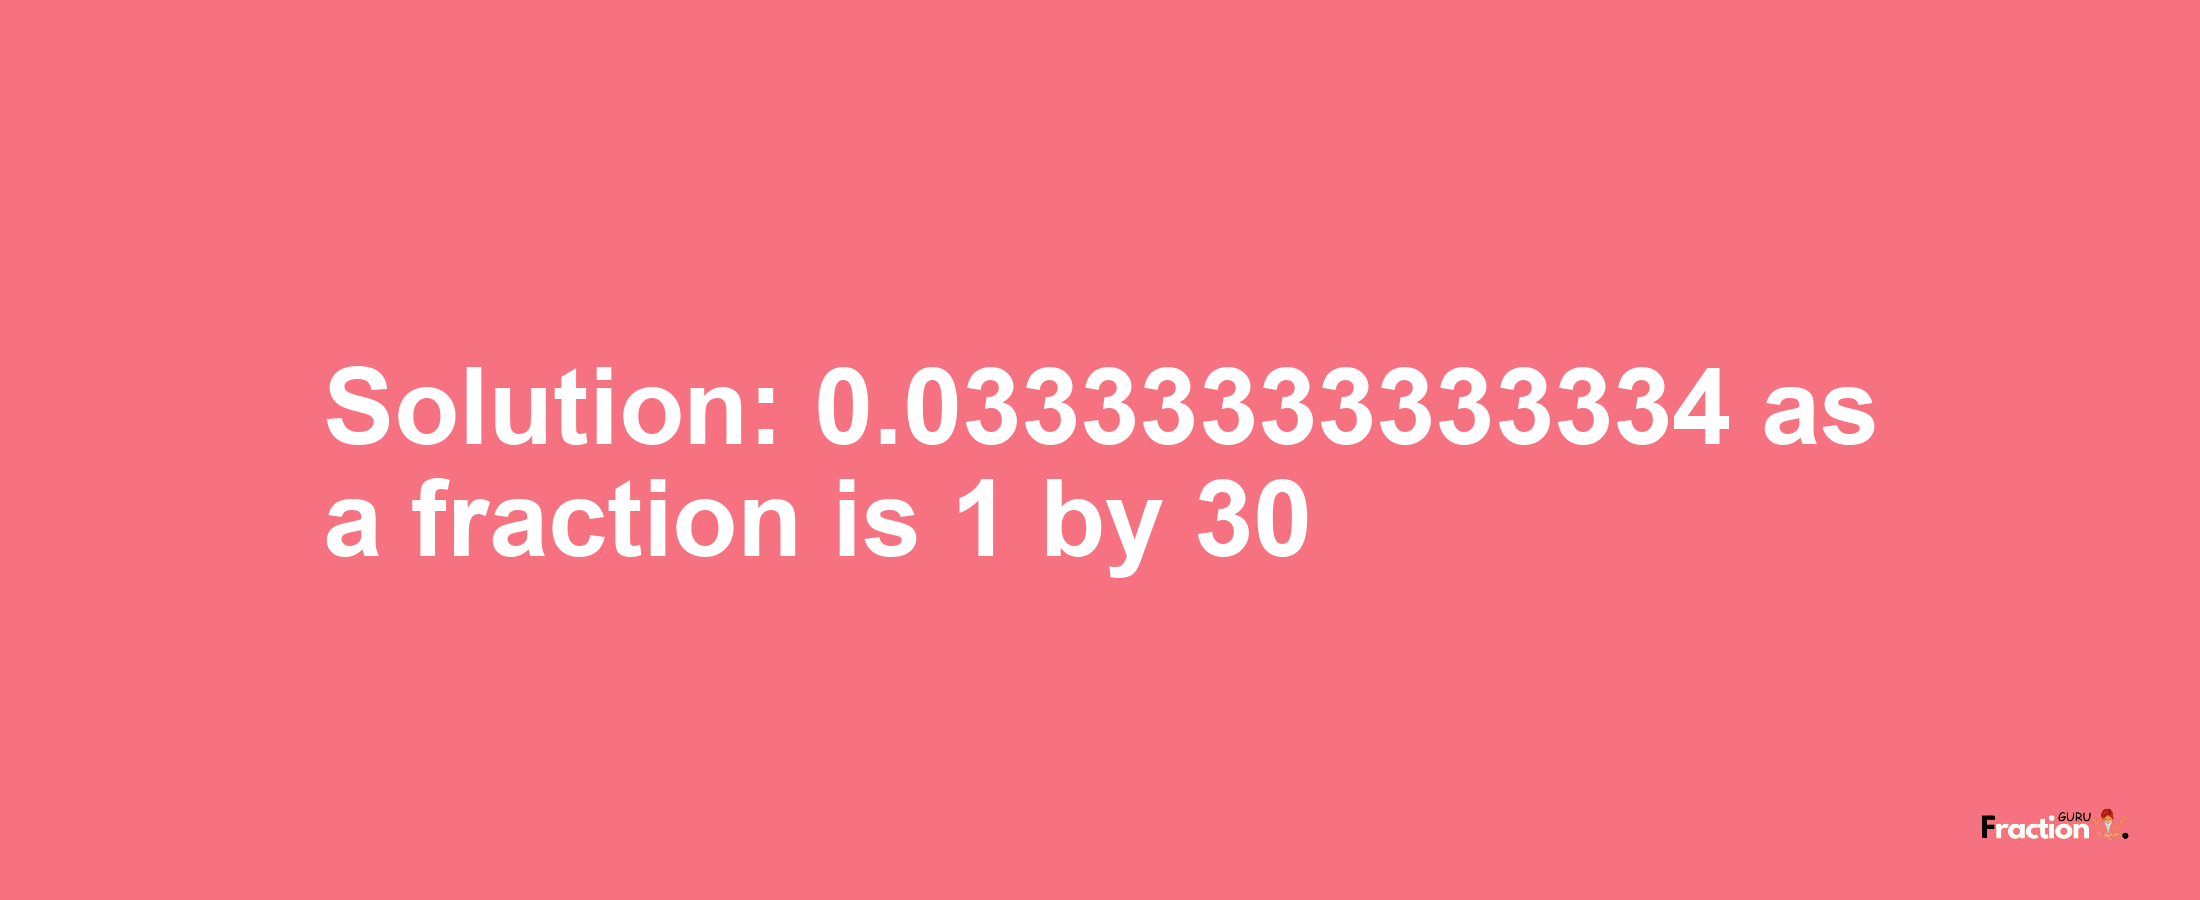 Solution:0.03333333333334 as a fraction is 1/30